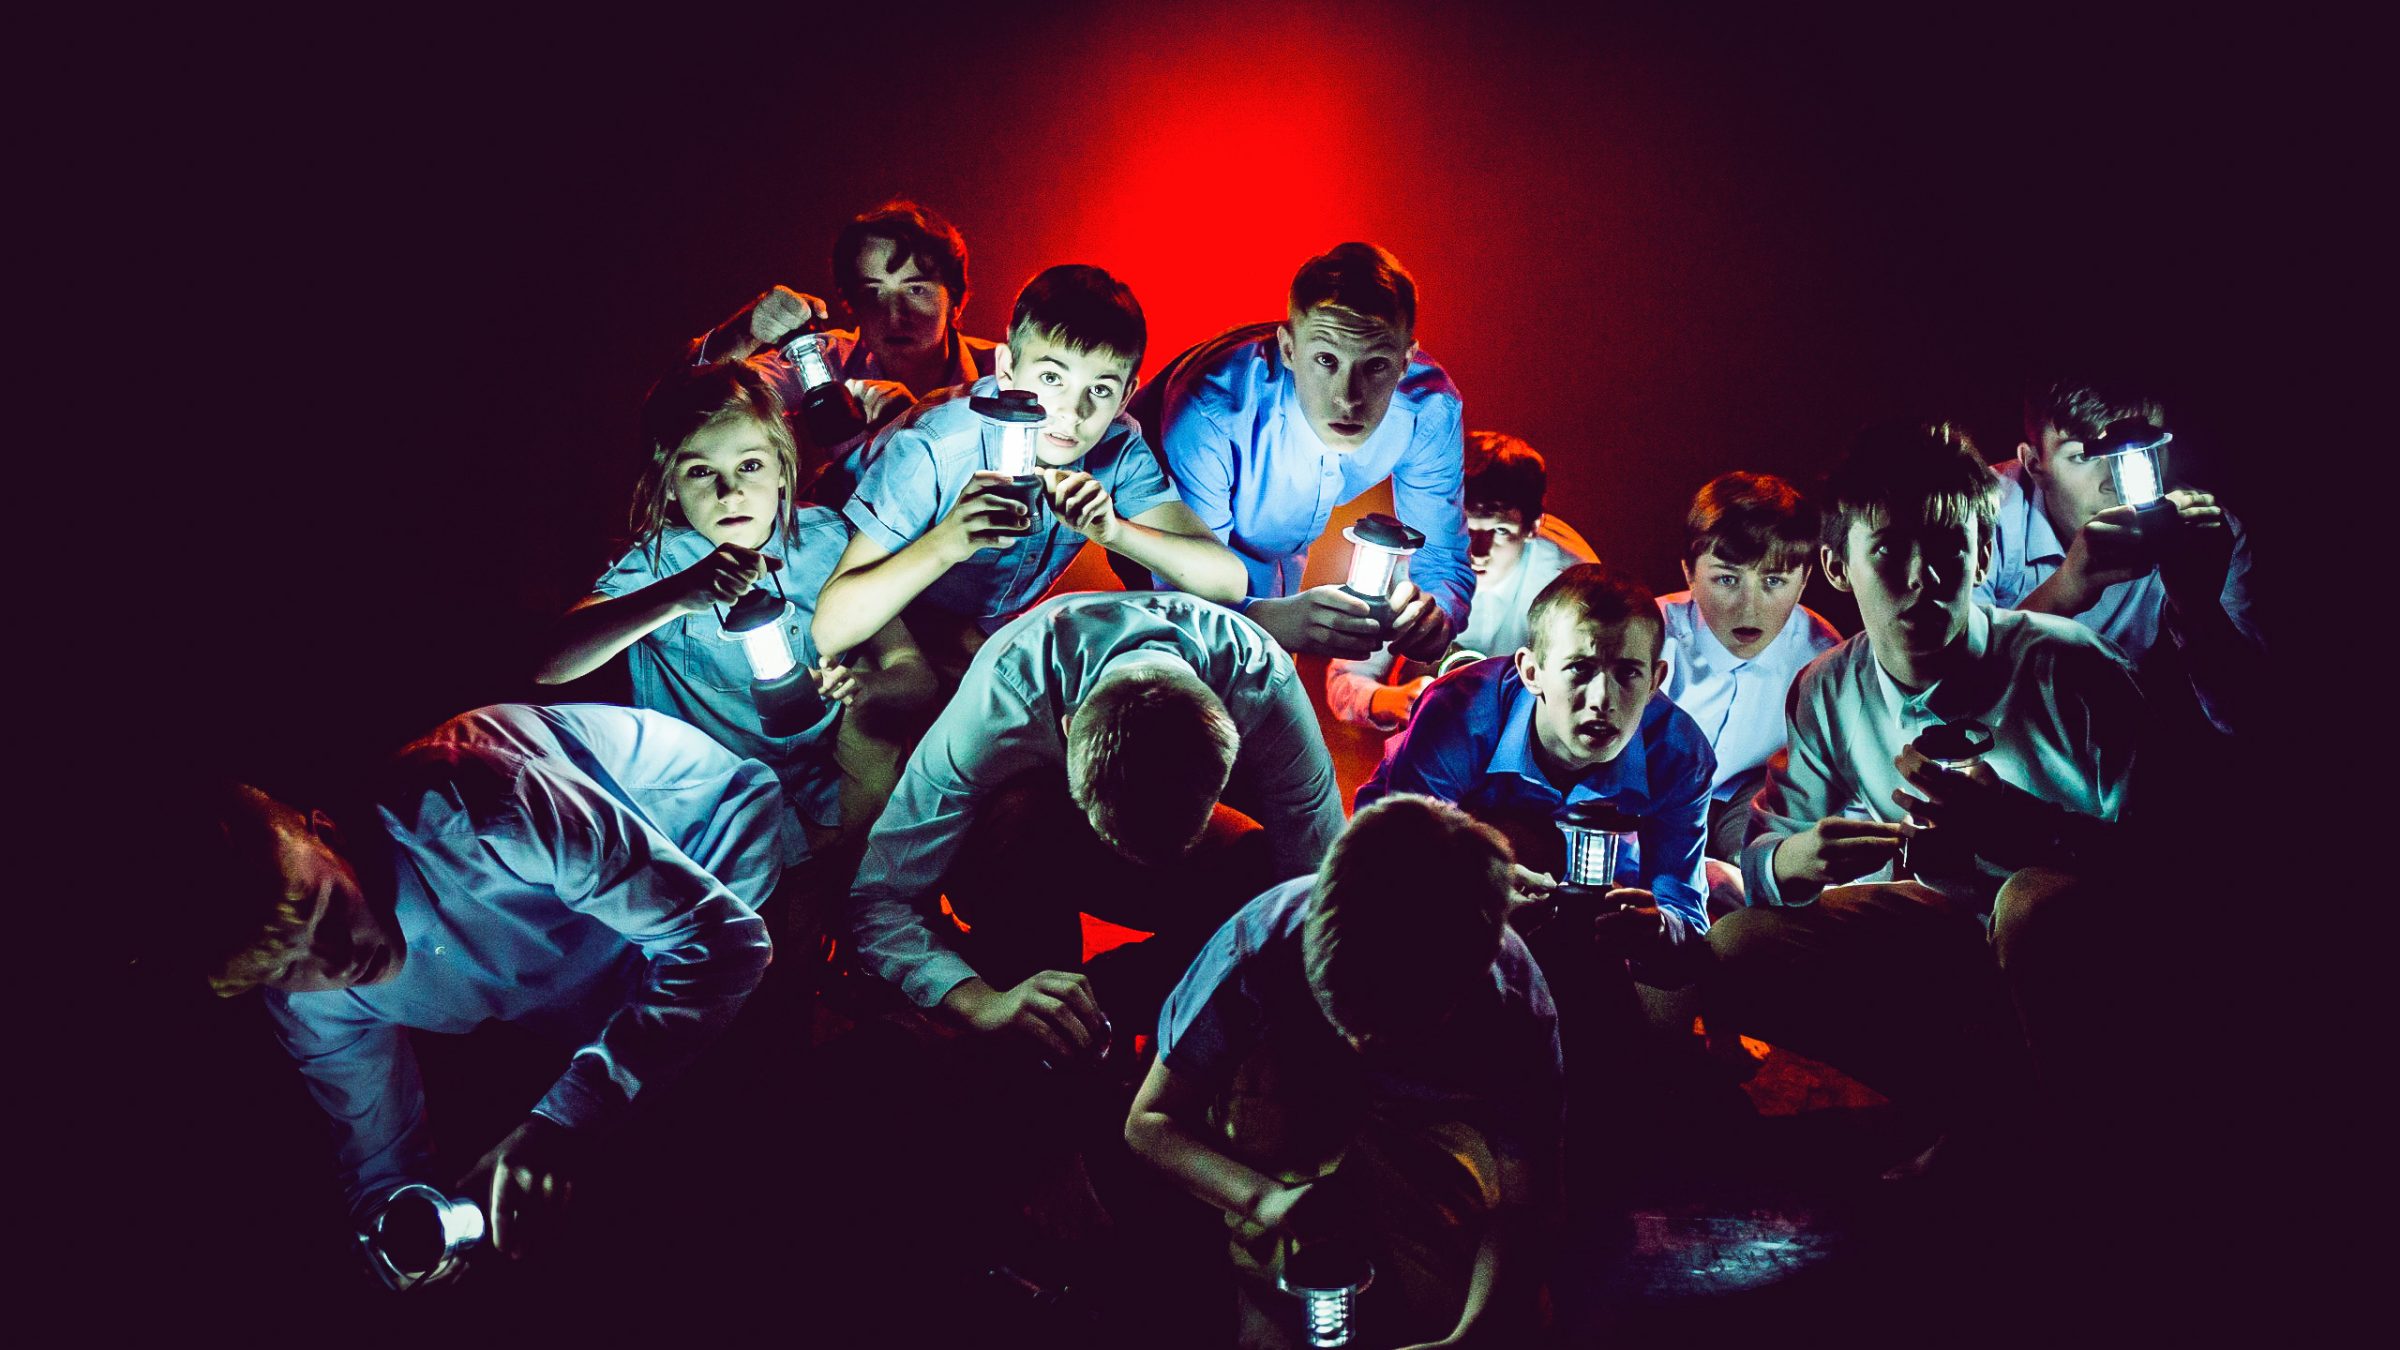 group of boys on a dark stage, shining torch lights in front of red back lighting. The boys are wearing blue tops and trousers and looking curious as they crouch in a huddle.